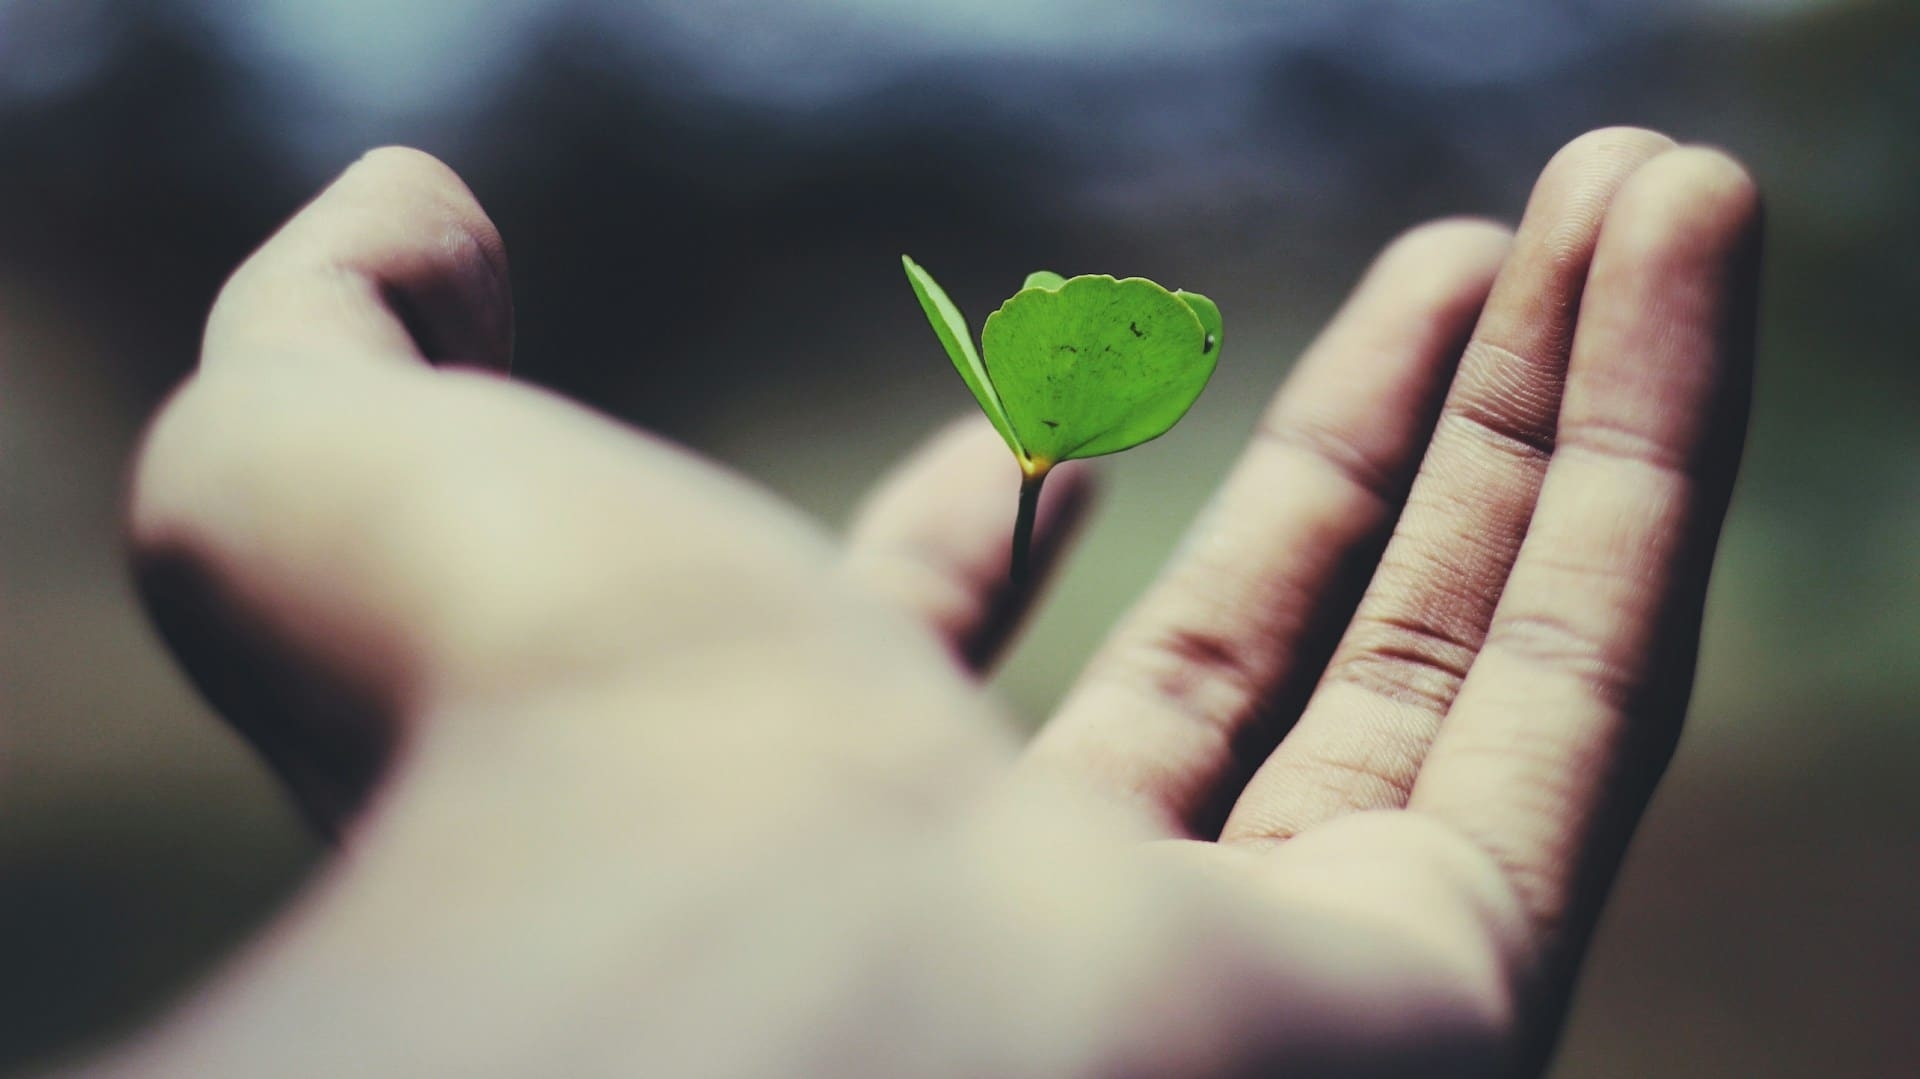 A seedling in a hand.